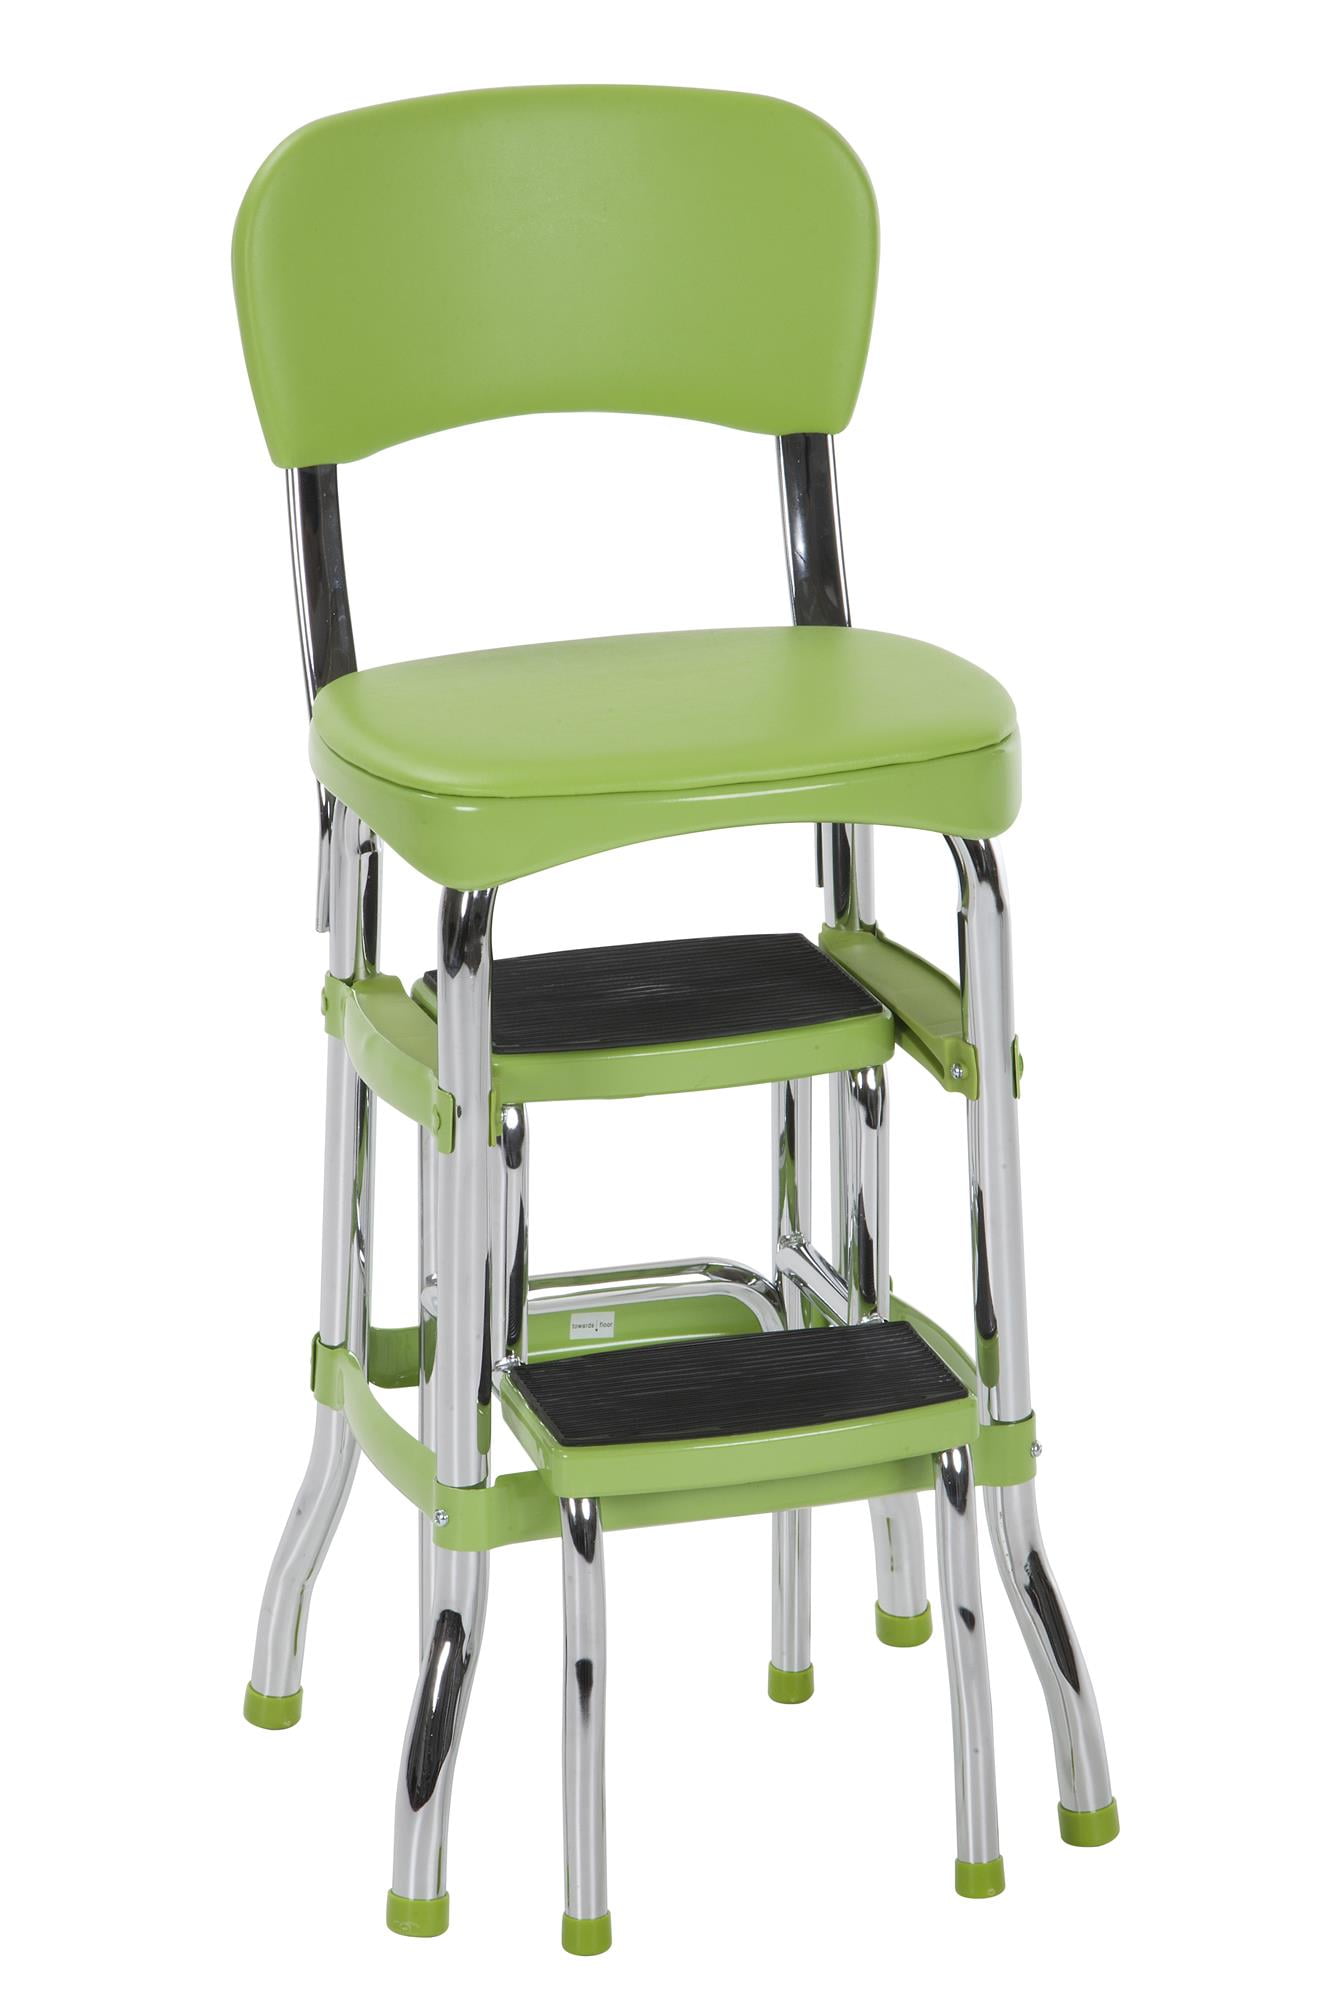 NEW Cosco GREEN Retro Counter Chair Step Stool Folding Kitchen Bar Home Office | eBay